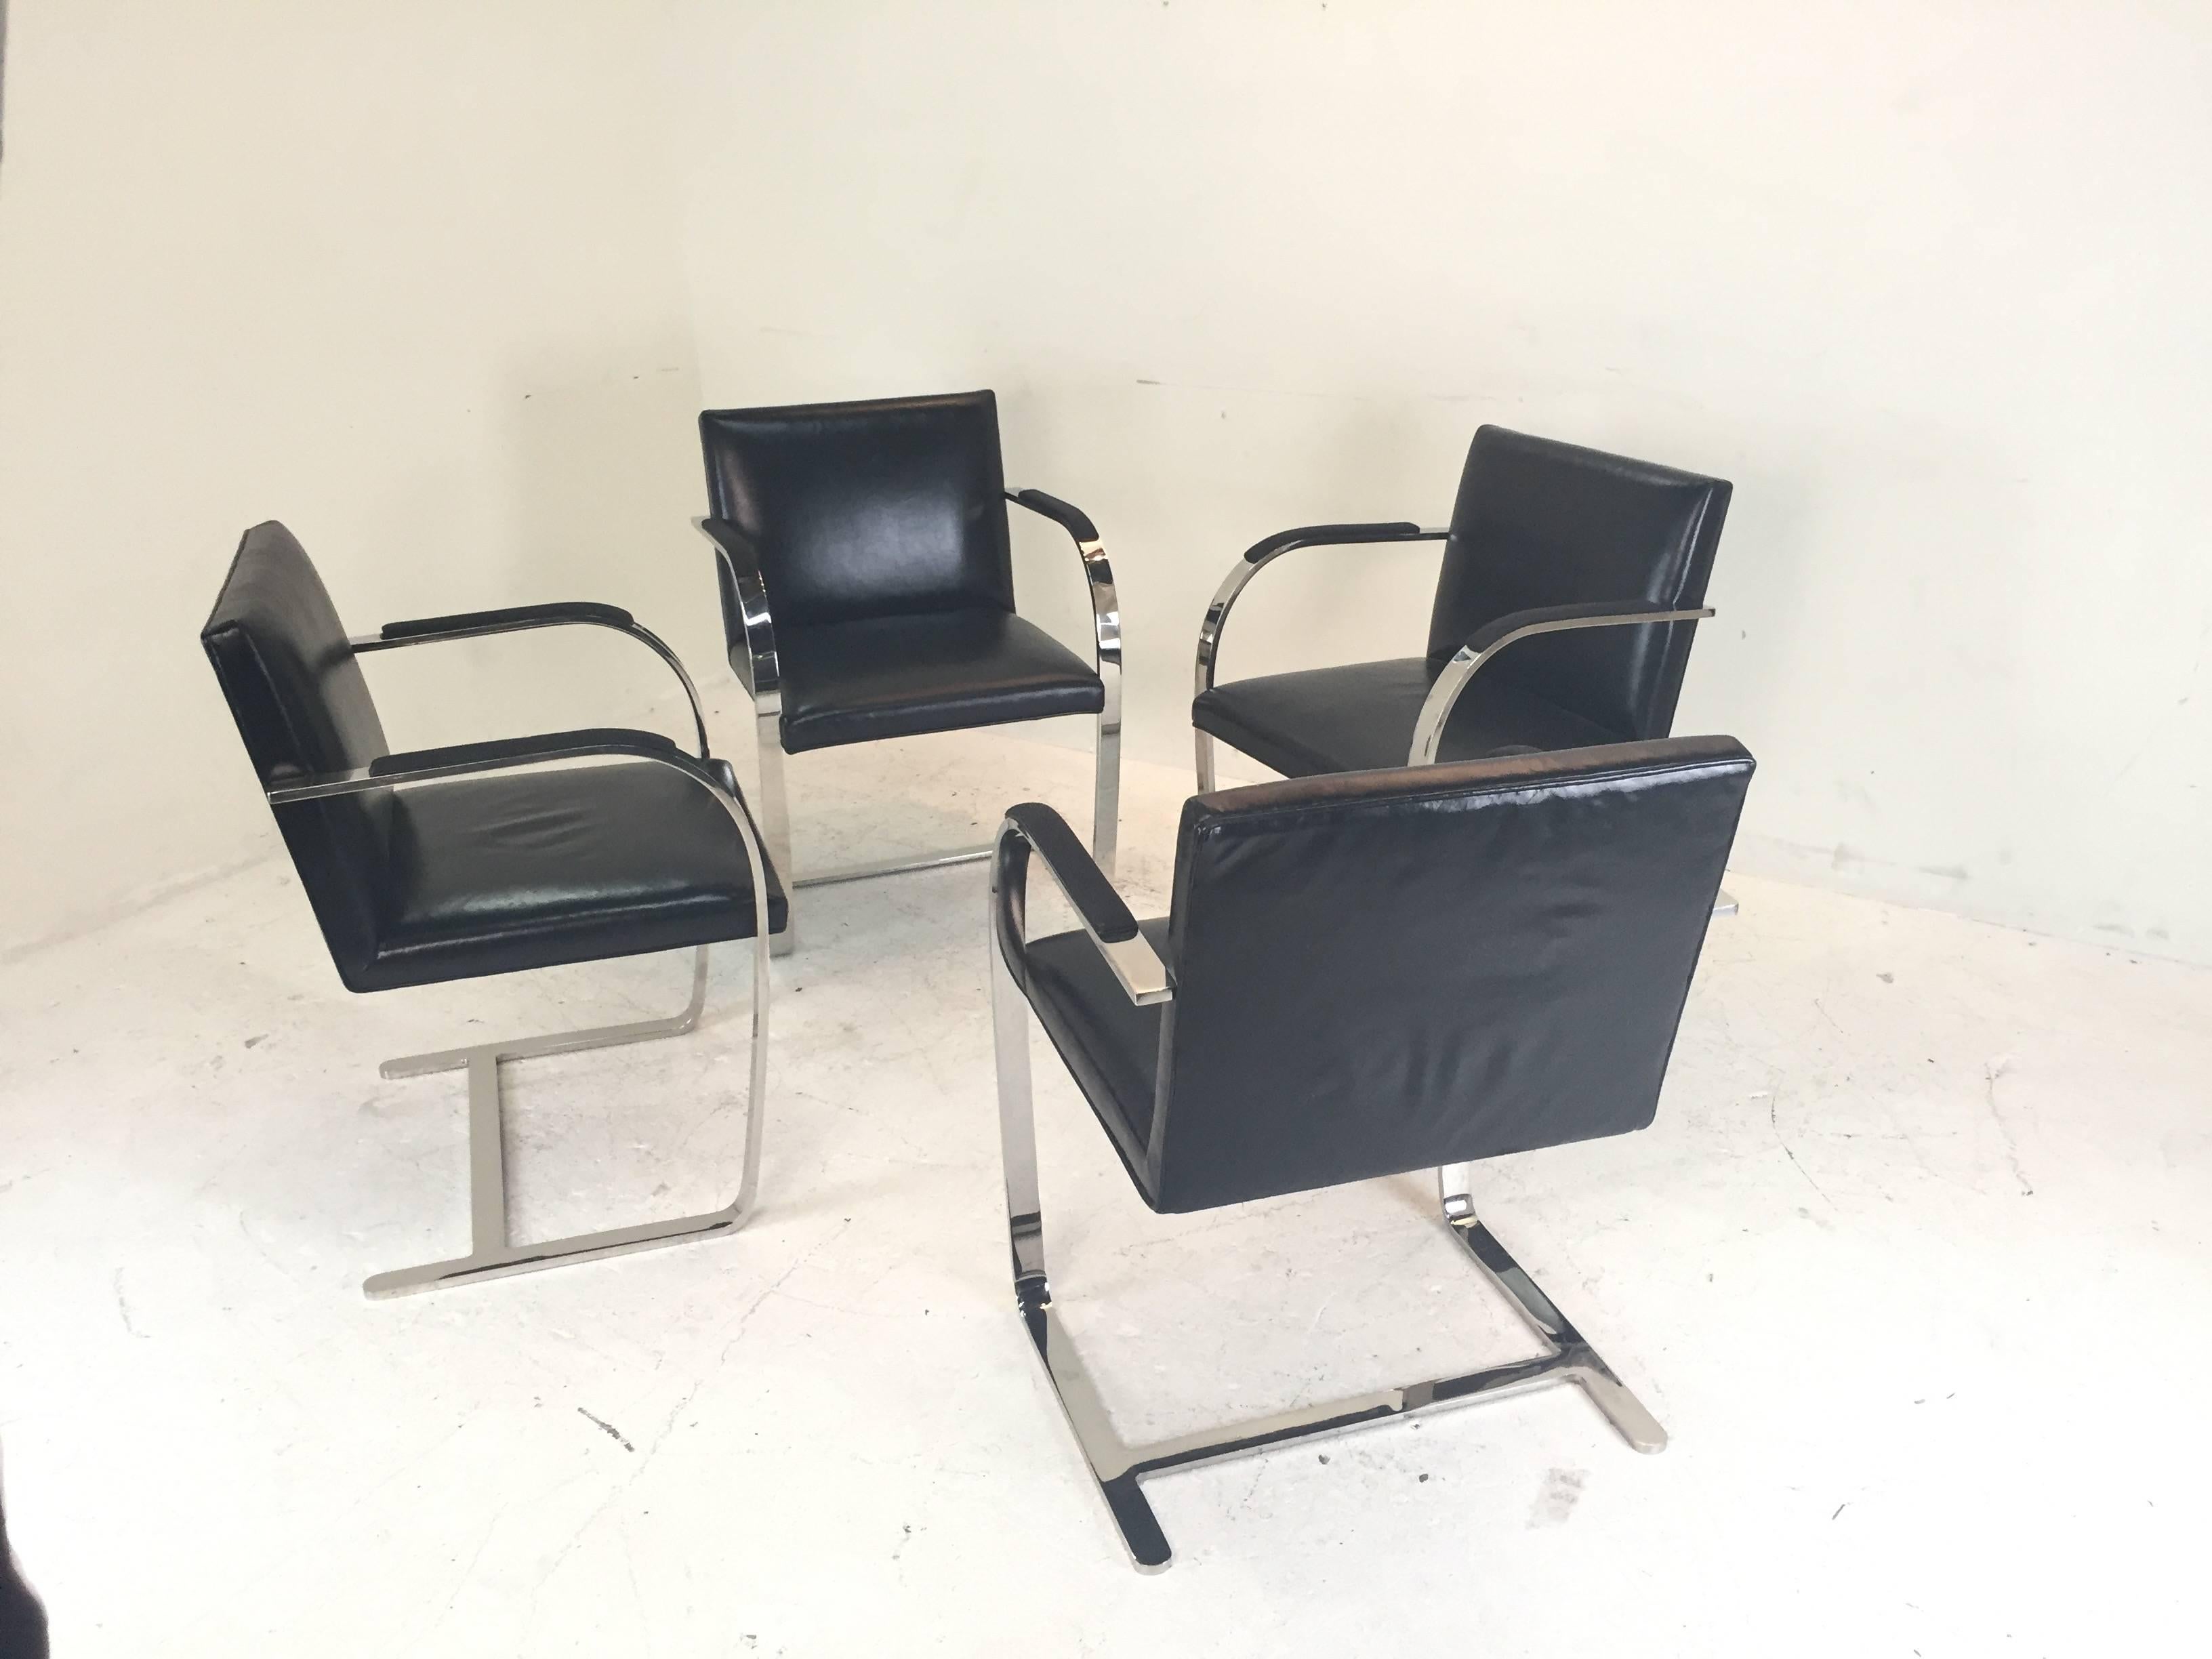 Four Stainless Brno Chairs with Sharkskin Arm Pads 1